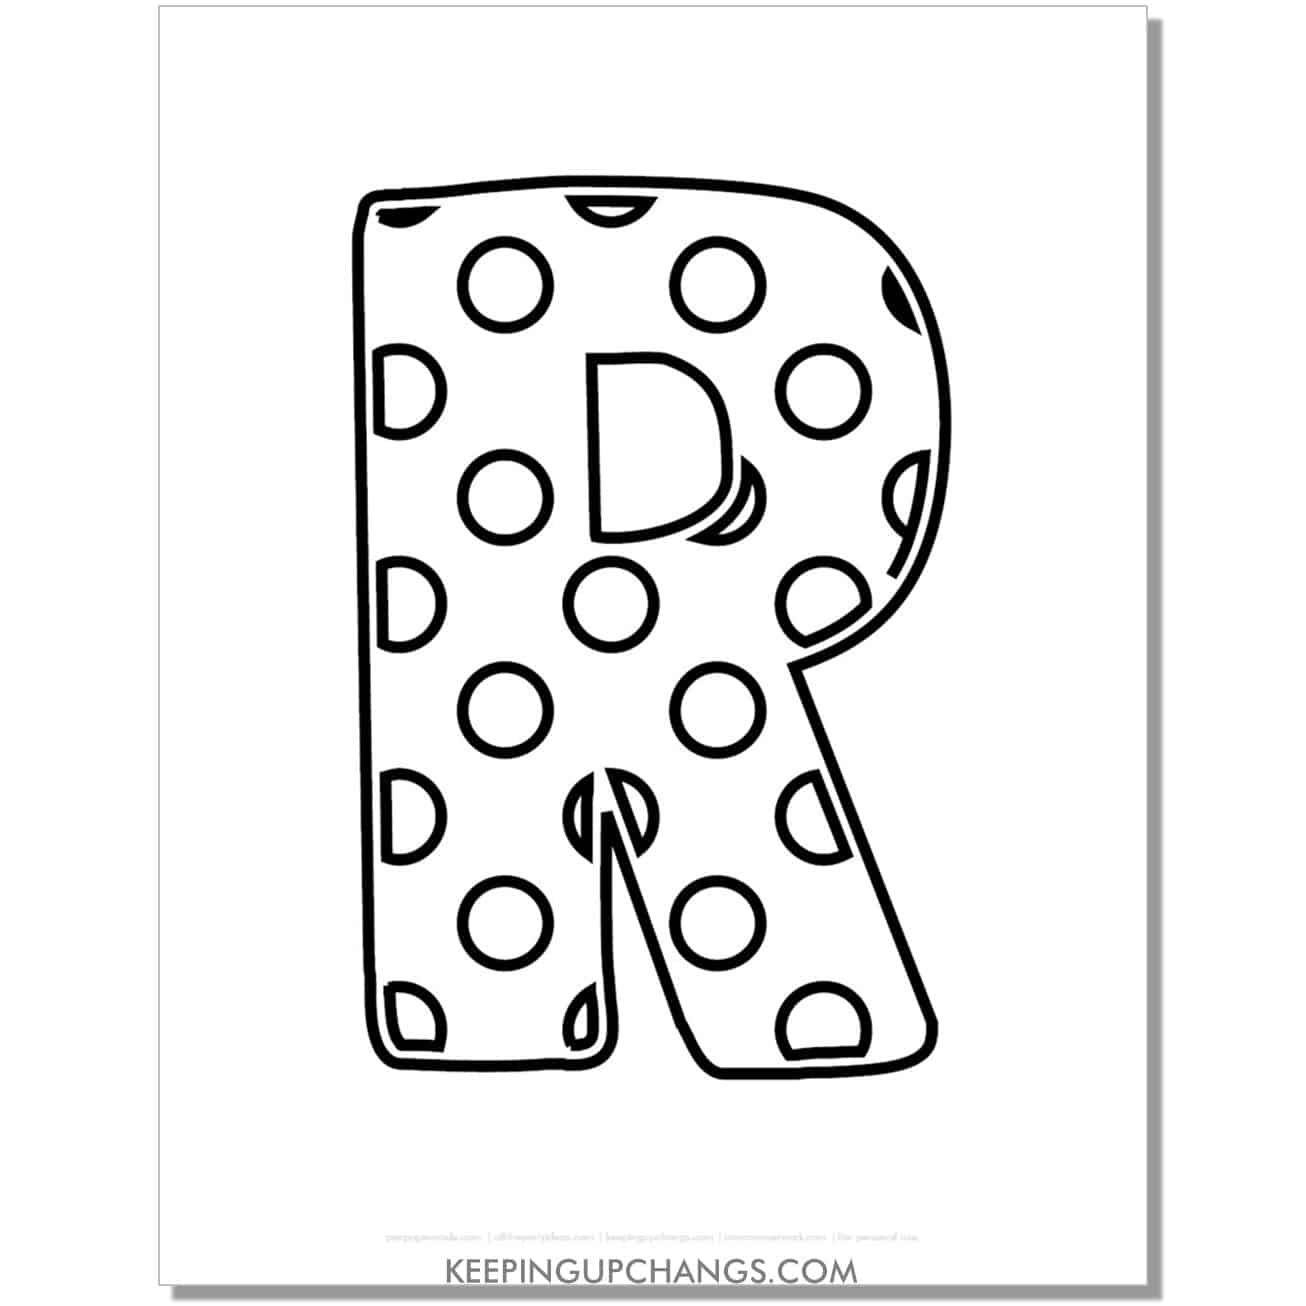 free alphabet letter r coloring page with polka dots for toddlers, preschool, kindergarten.